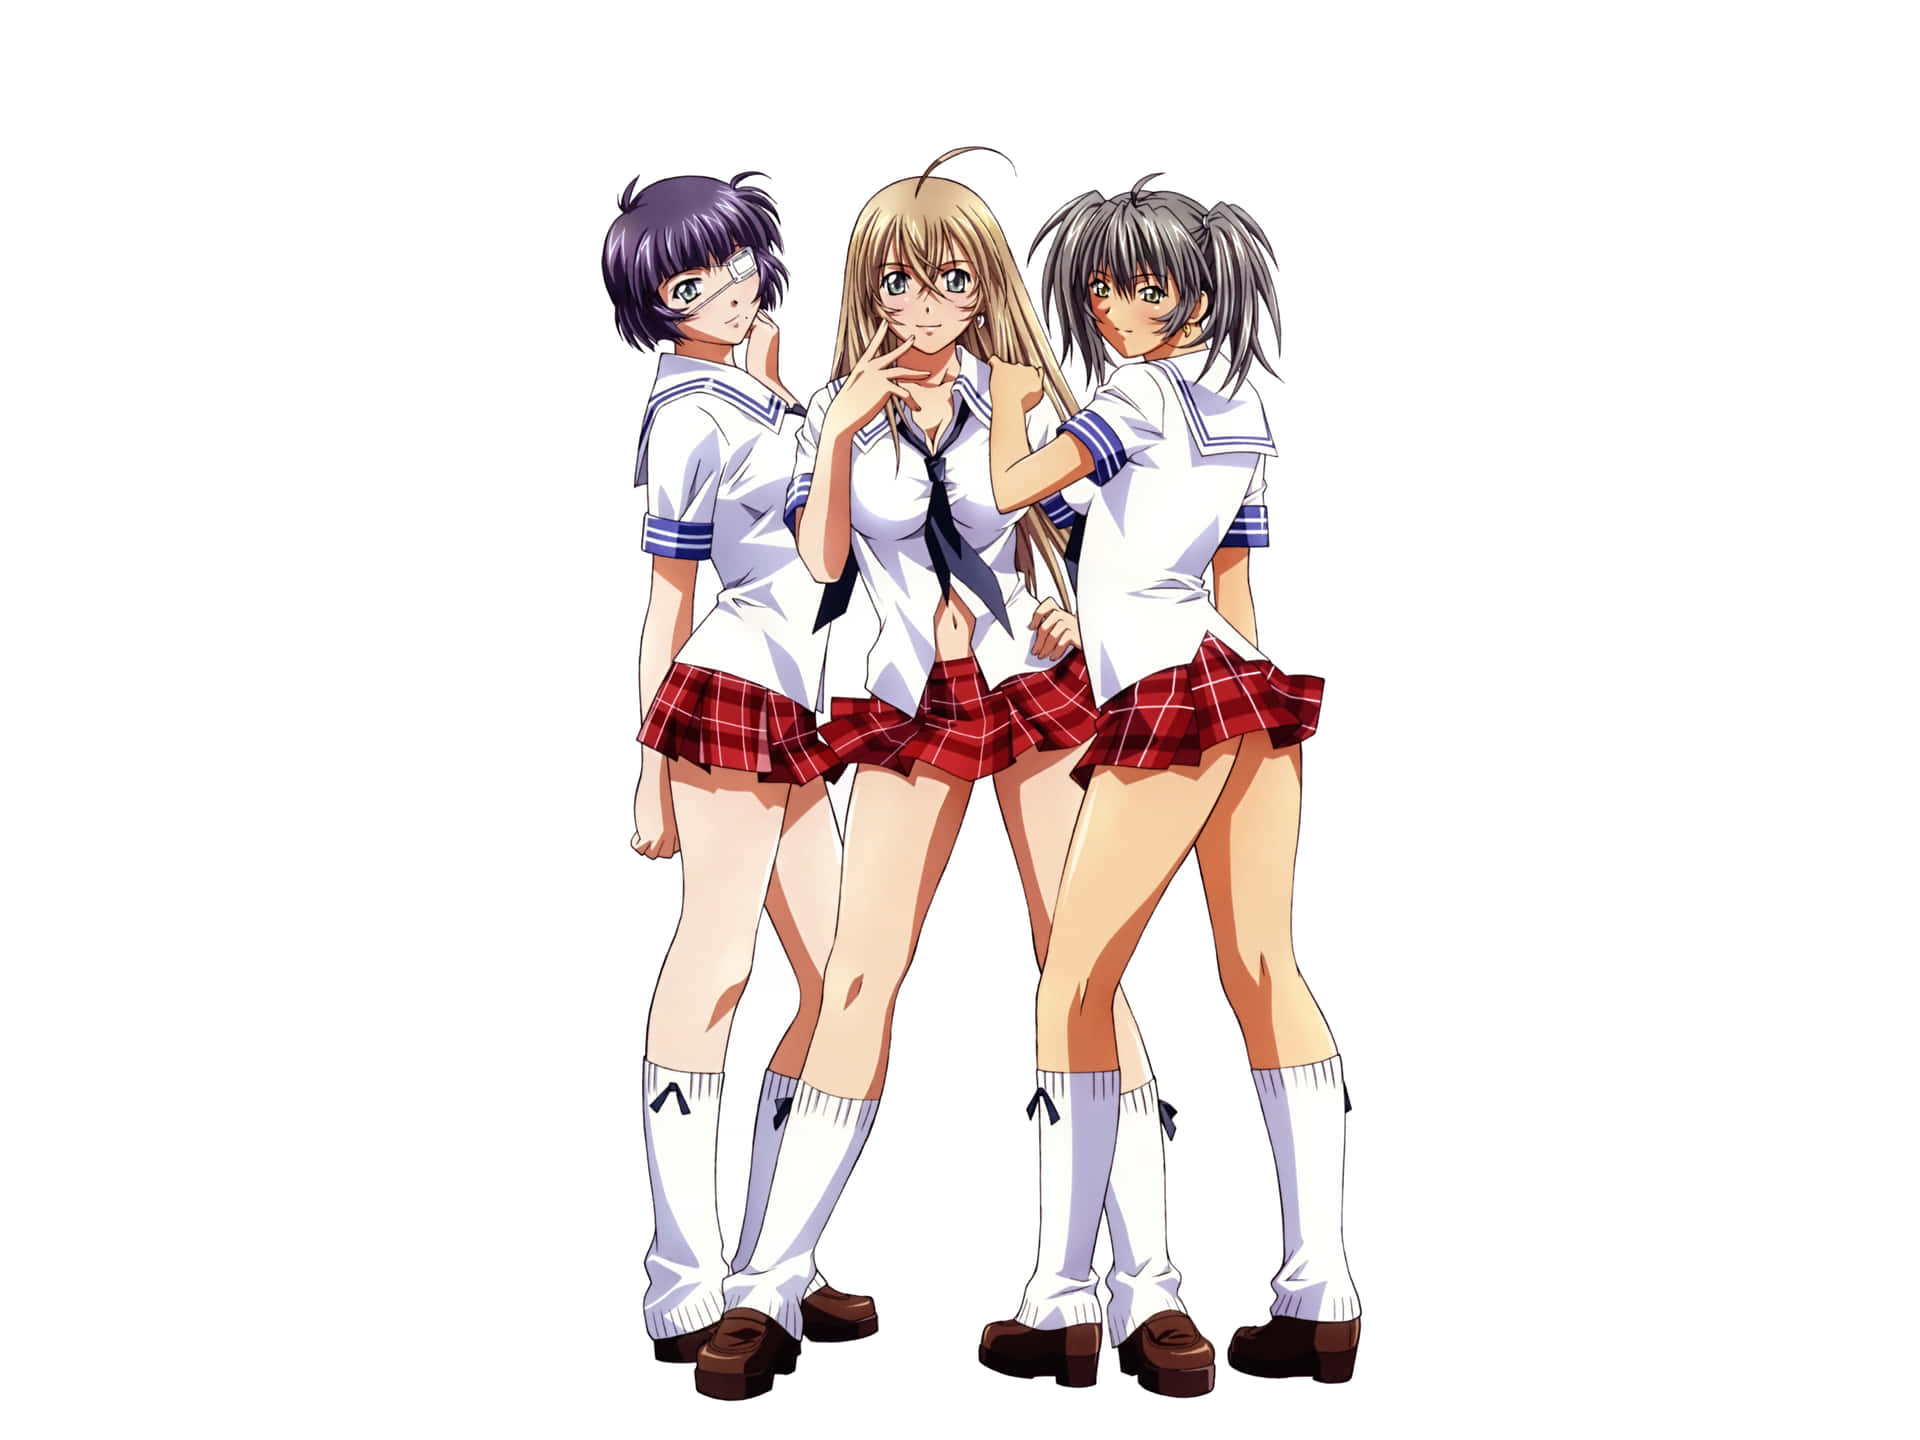 All Female Warriors Pose for a Picture in an Epic Action Scene from the Anime Show, Ikki Tousen Wallpaper